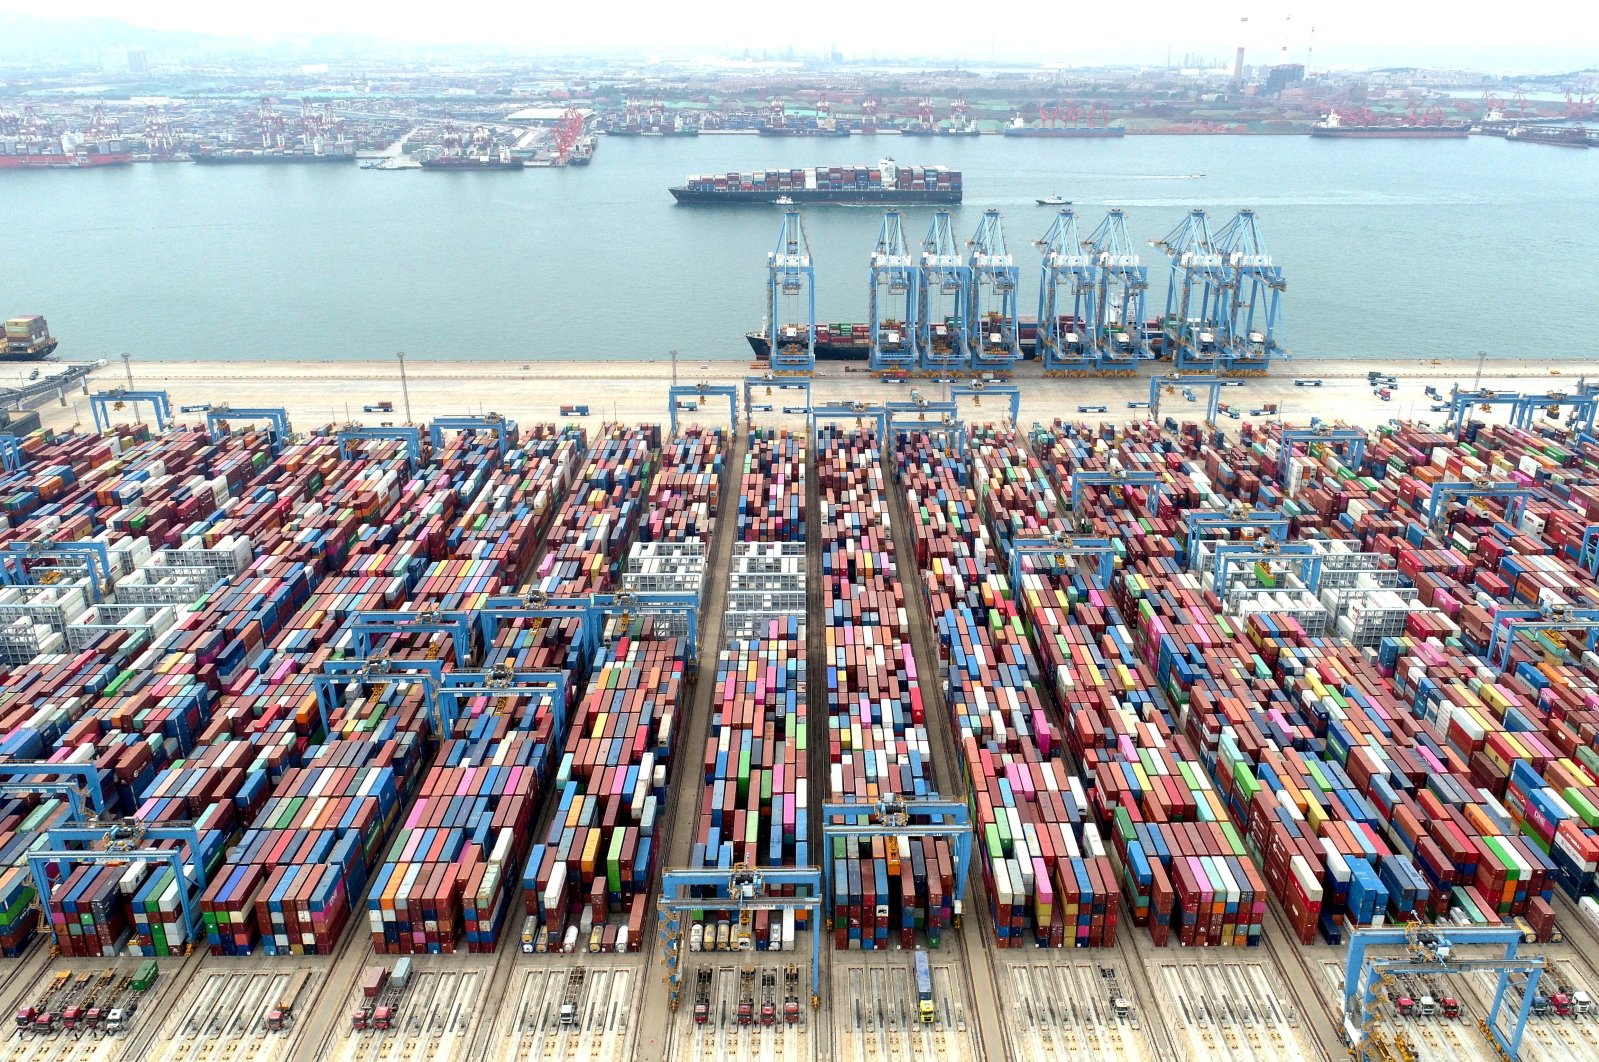 An aerial view shows containers and cargo vessels at the Qingdao port in Shandong province, China, May 9, 2022. (Reuters Photo)